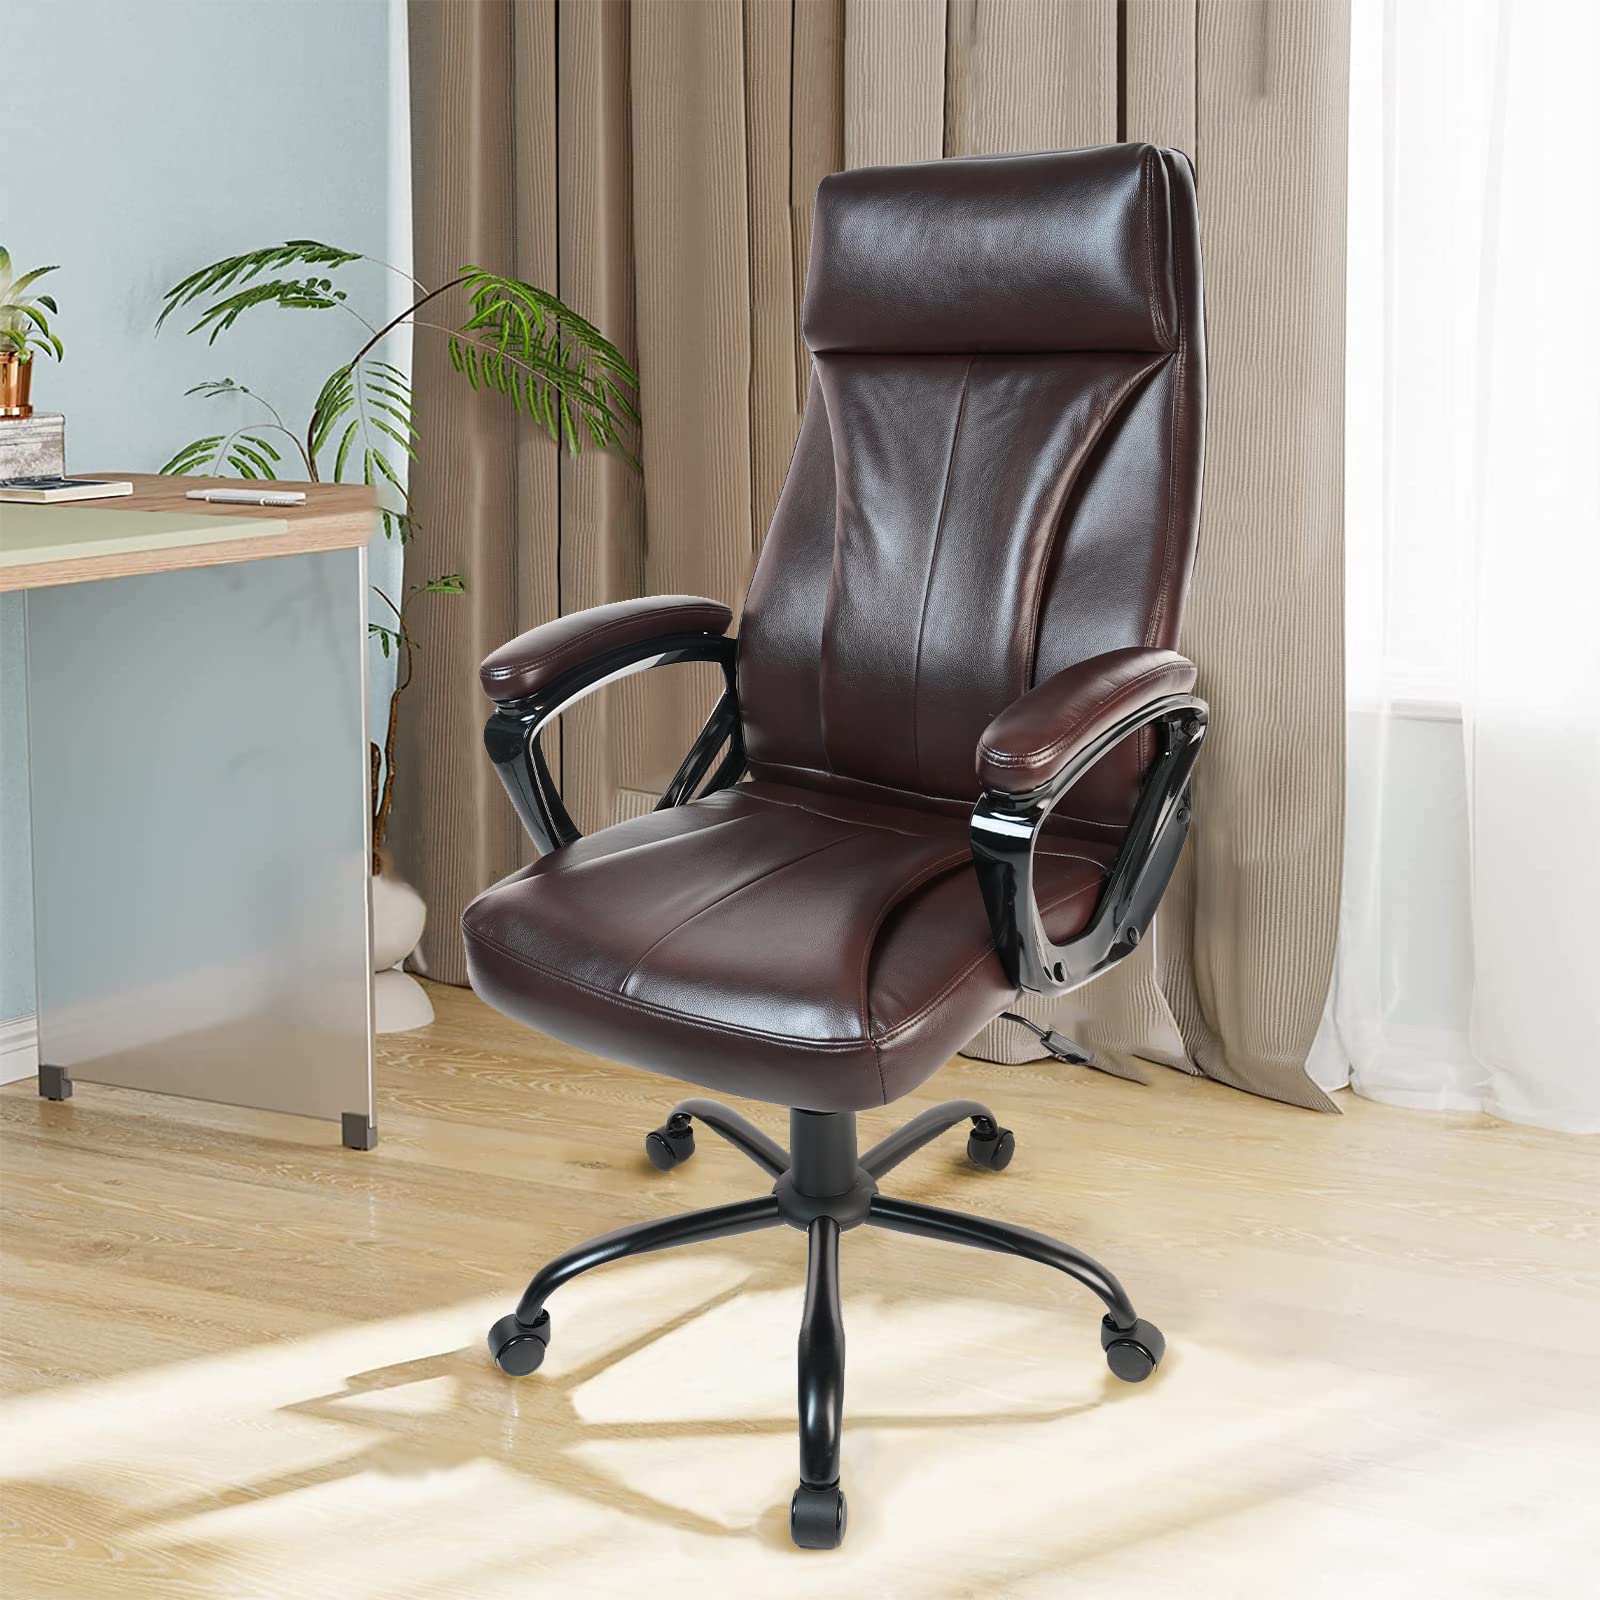 CLATINA High Back Leather Office Chair, Ergonomic Executive Computer Desk Chair with Lumbar Support and Padded Armrests, Adjustable Swivel Rolling Chair for Home Office, Red Brown